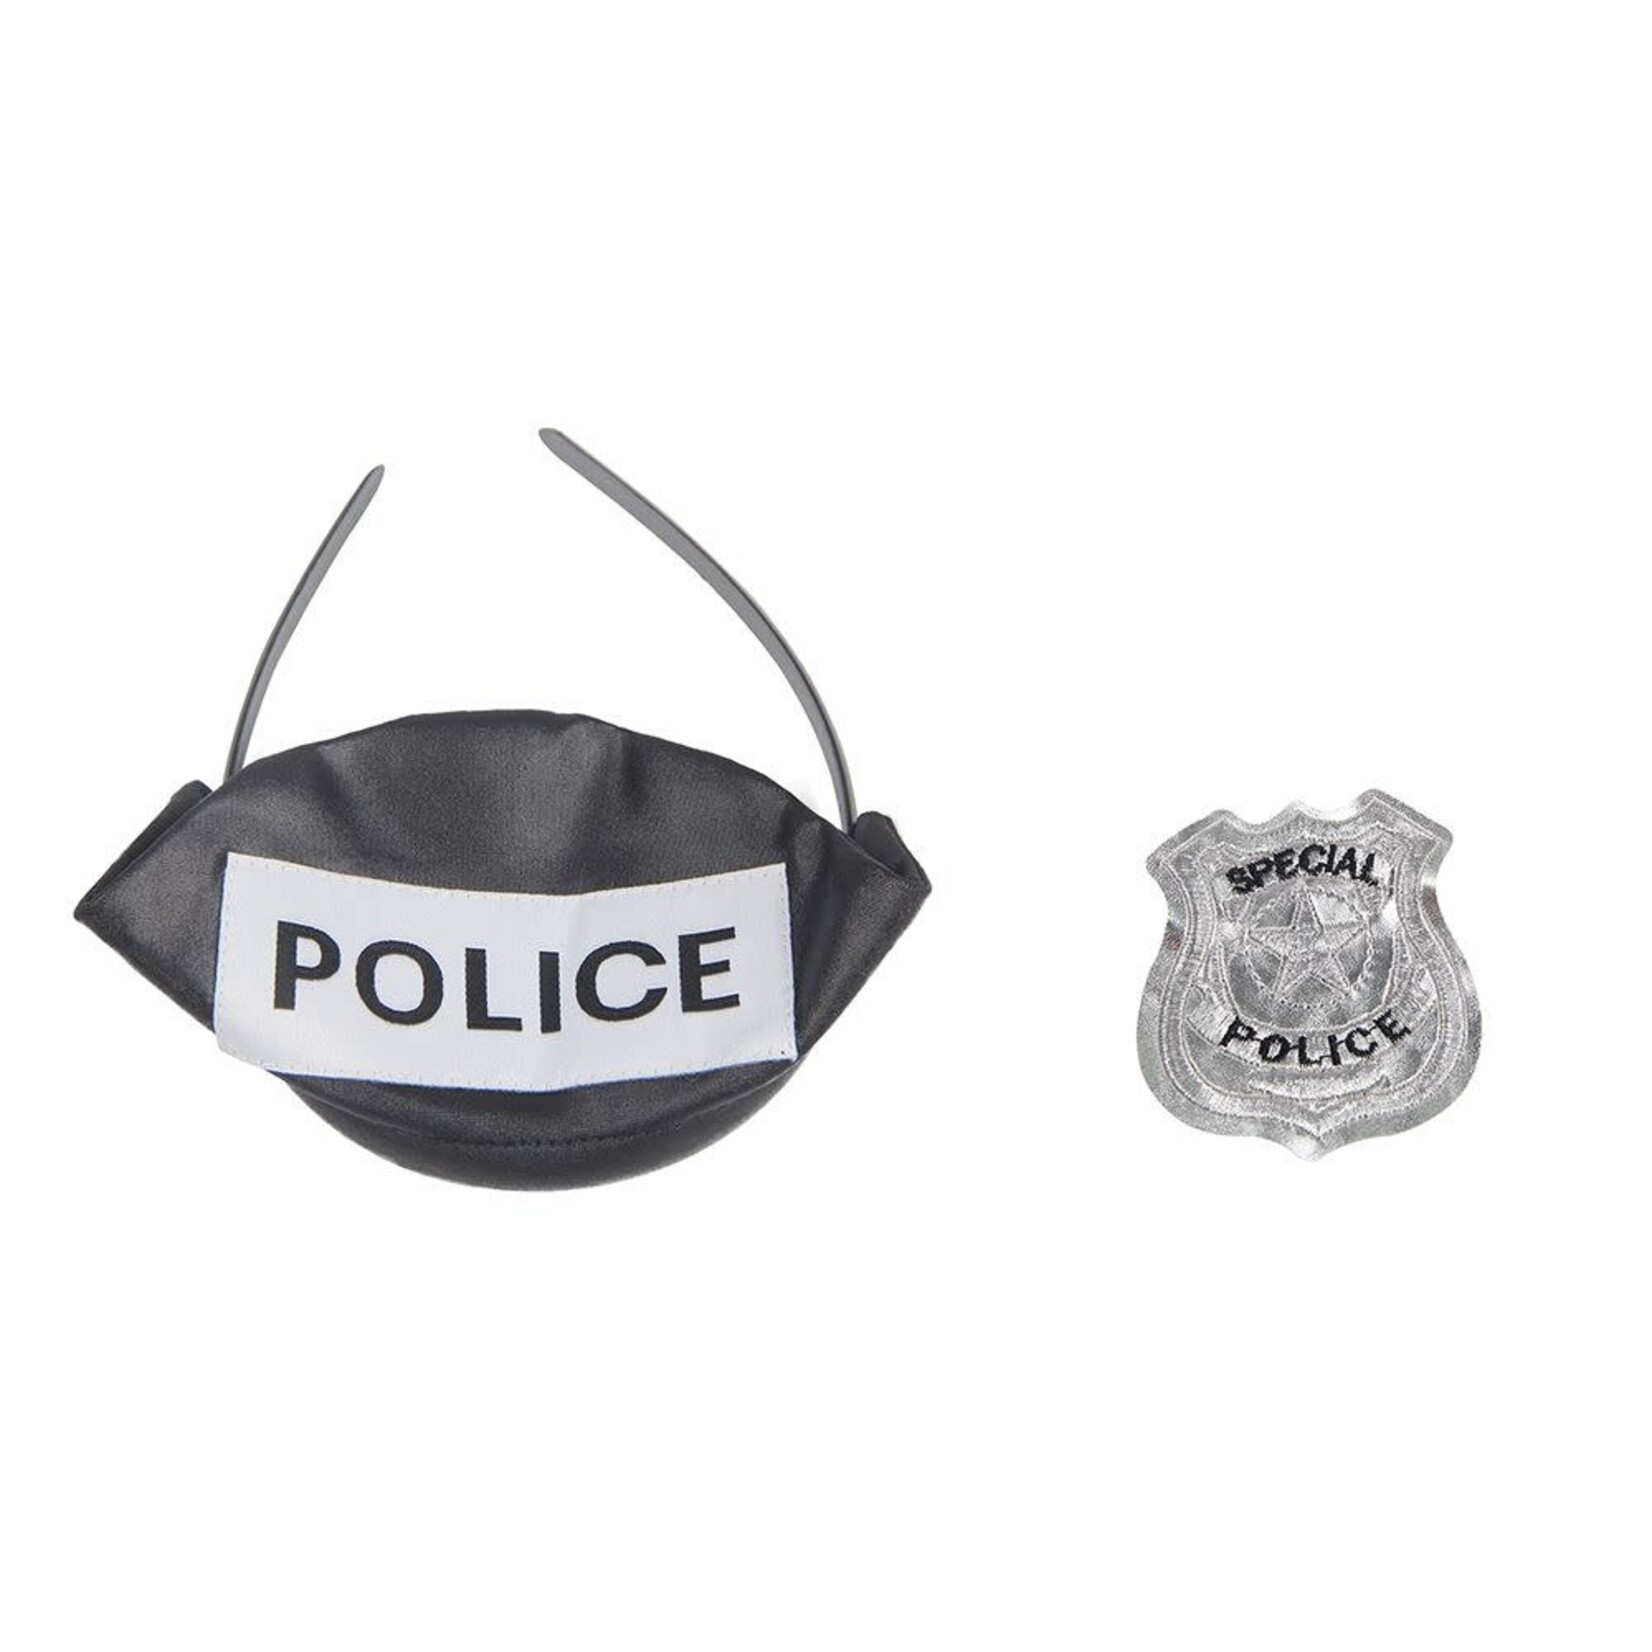 OH YEAH! -  ZIPPER FRONT HOLLOW OUT POLICE COSTUME WITH HEADWEAR XL-2XL